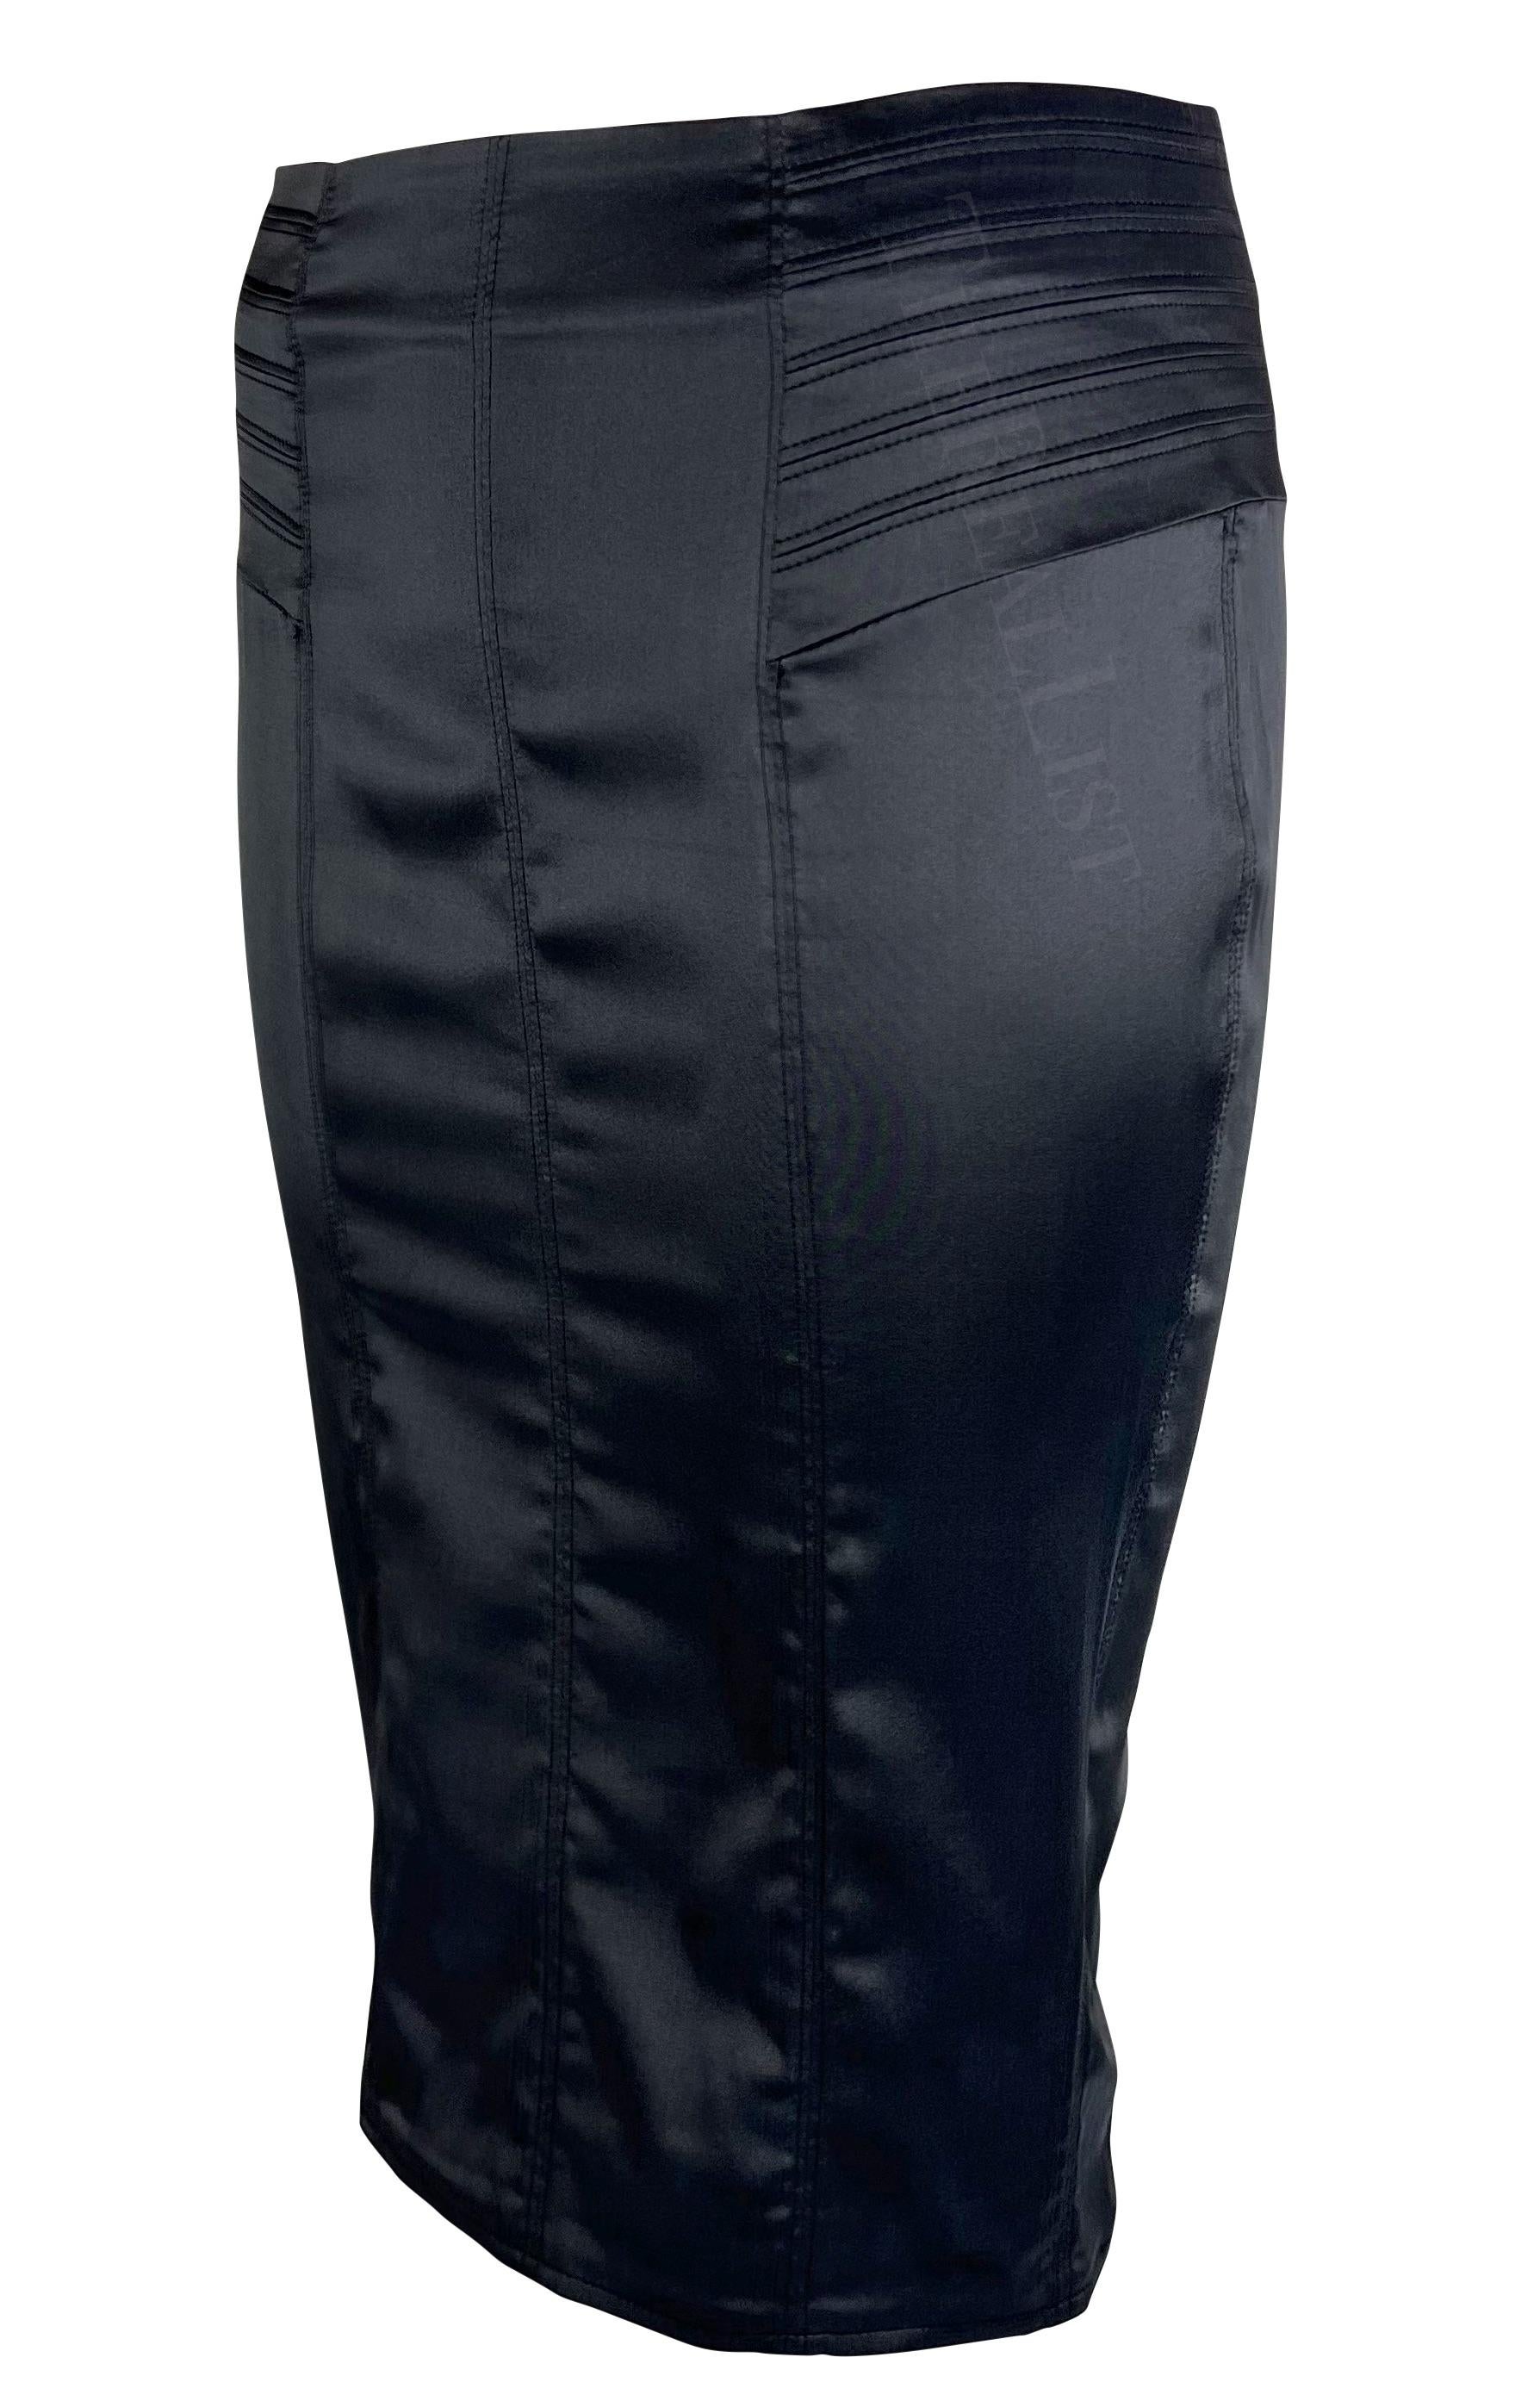 Presenting a fabulous black silk satin Gucci pencil skirt, designed by Tom Ford. From the Fall/Winter 2003 collection, this skirt features large panels, a slit at the back, and is made complete with quilted details at either side.

Approximate